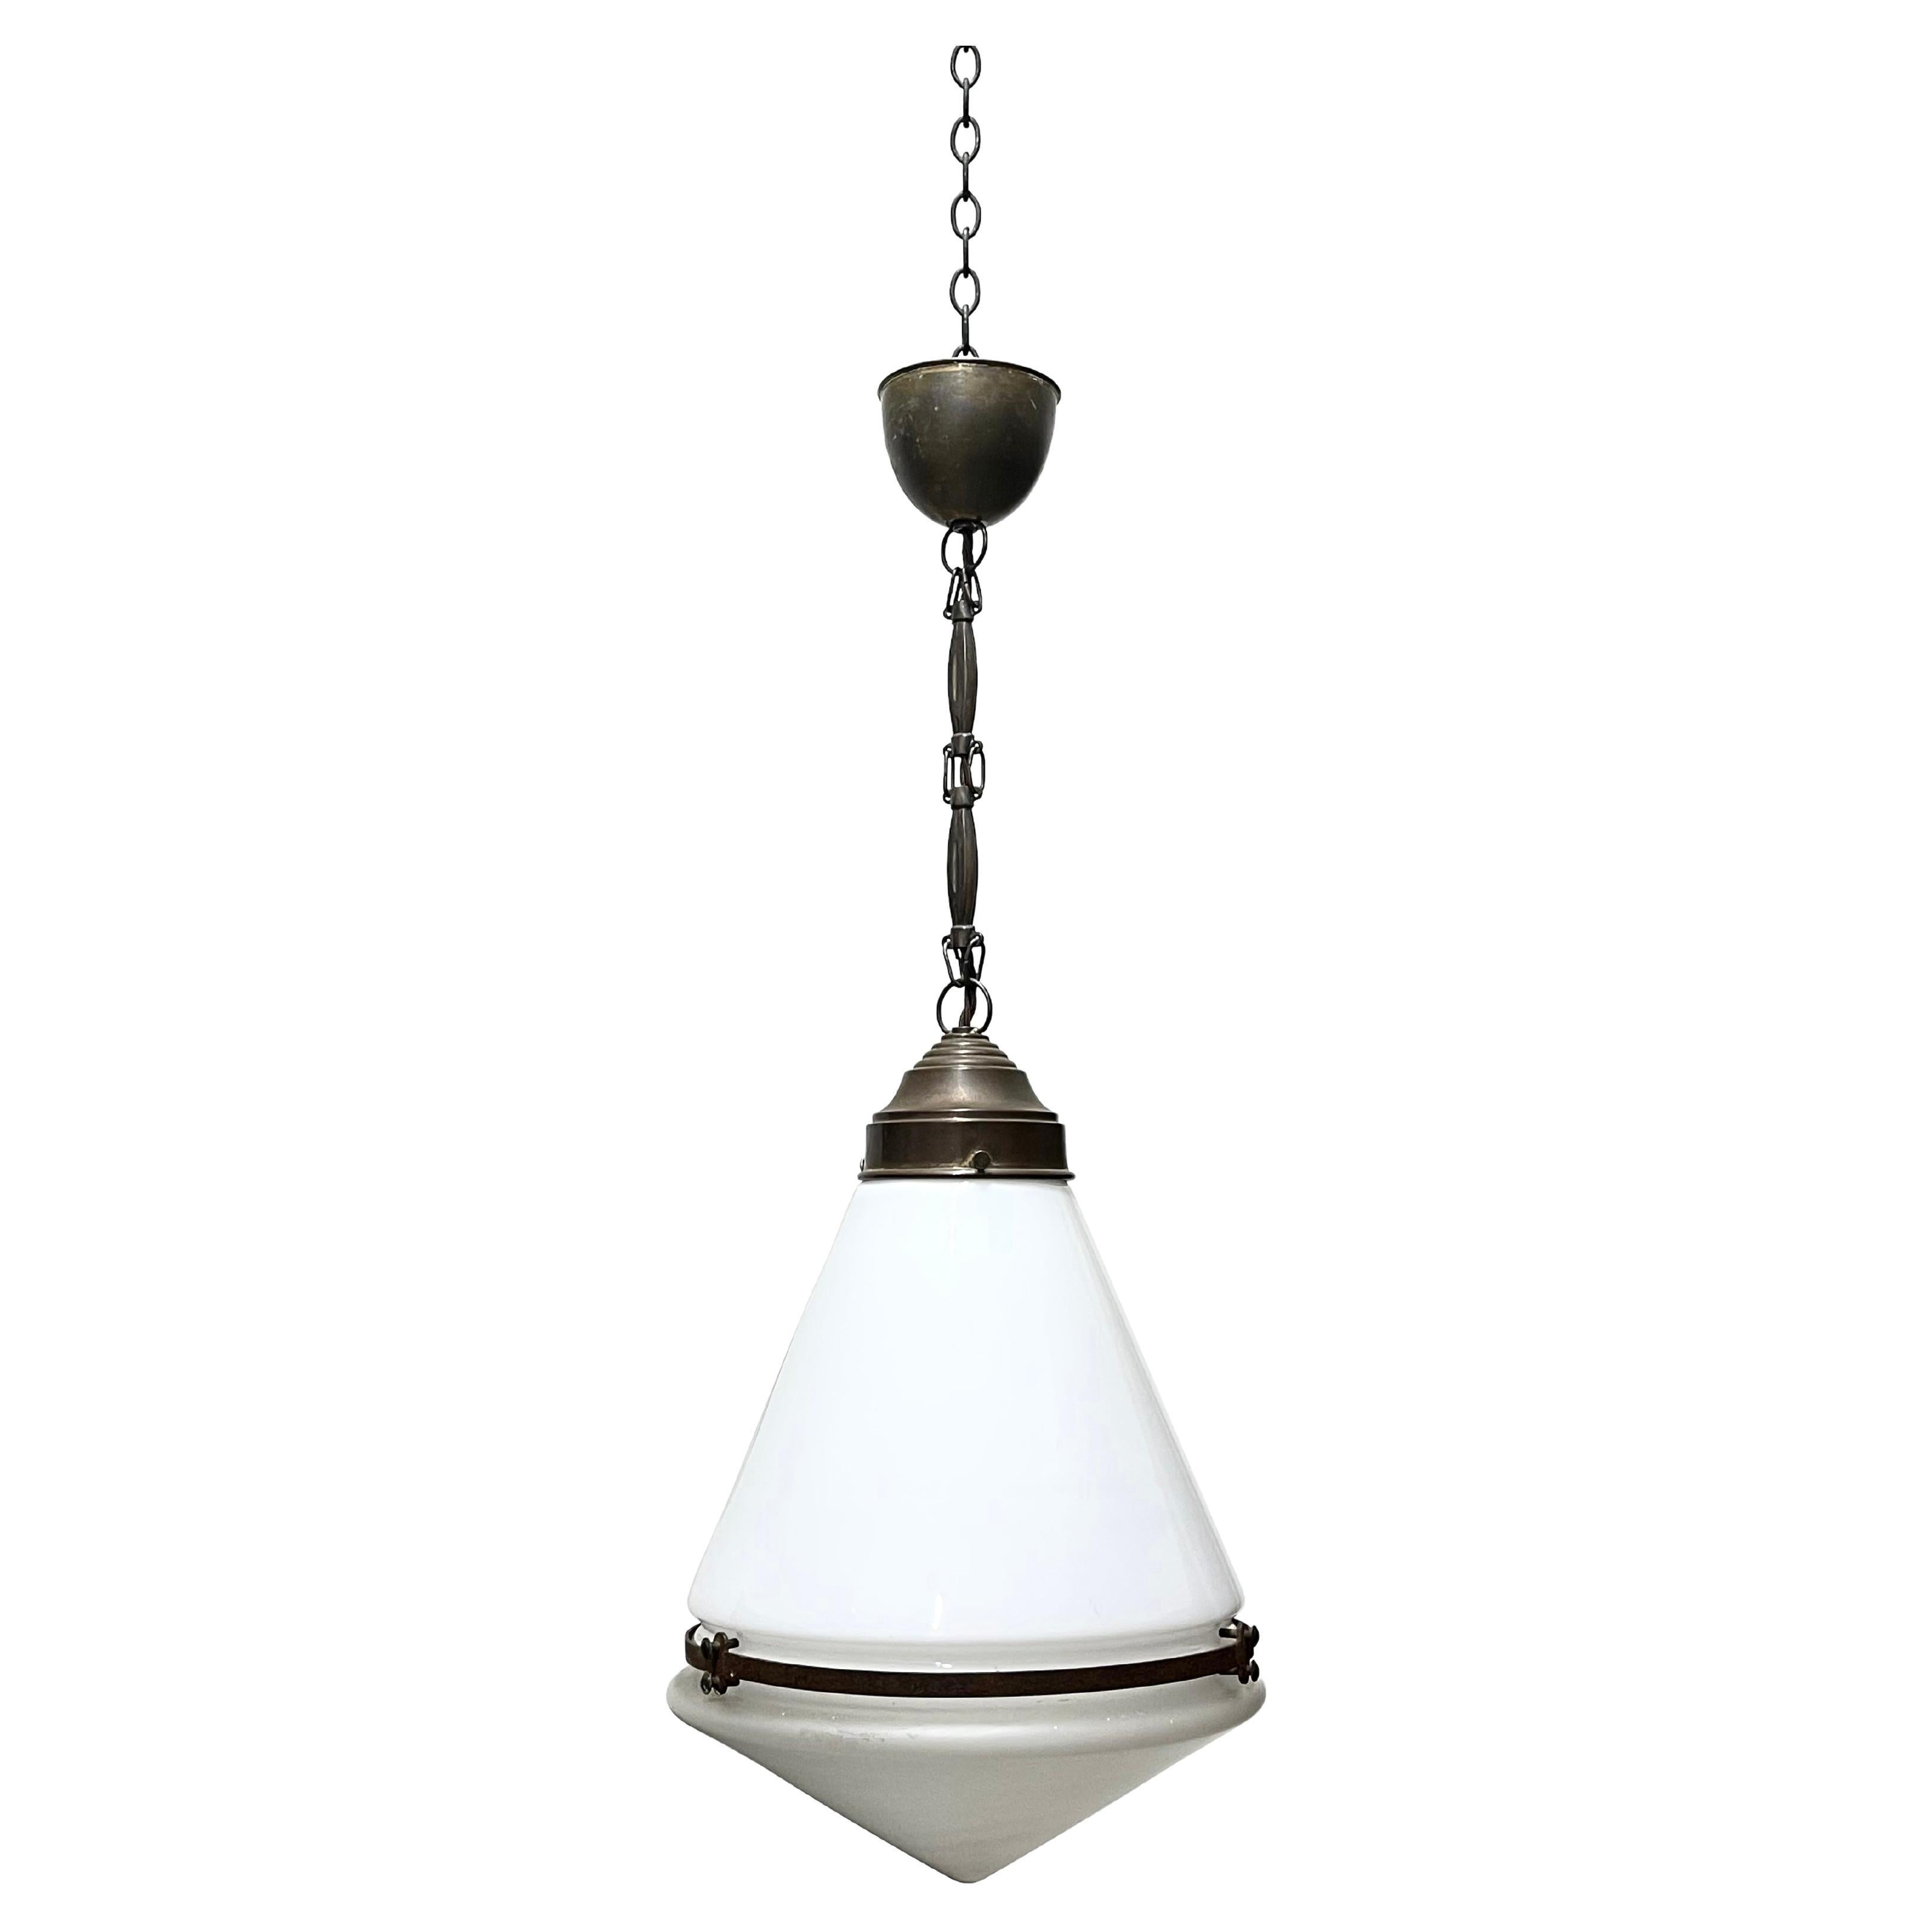 Antique Conical Opaline Milk Glass Ceiling Pendant Light by Peter Behrens